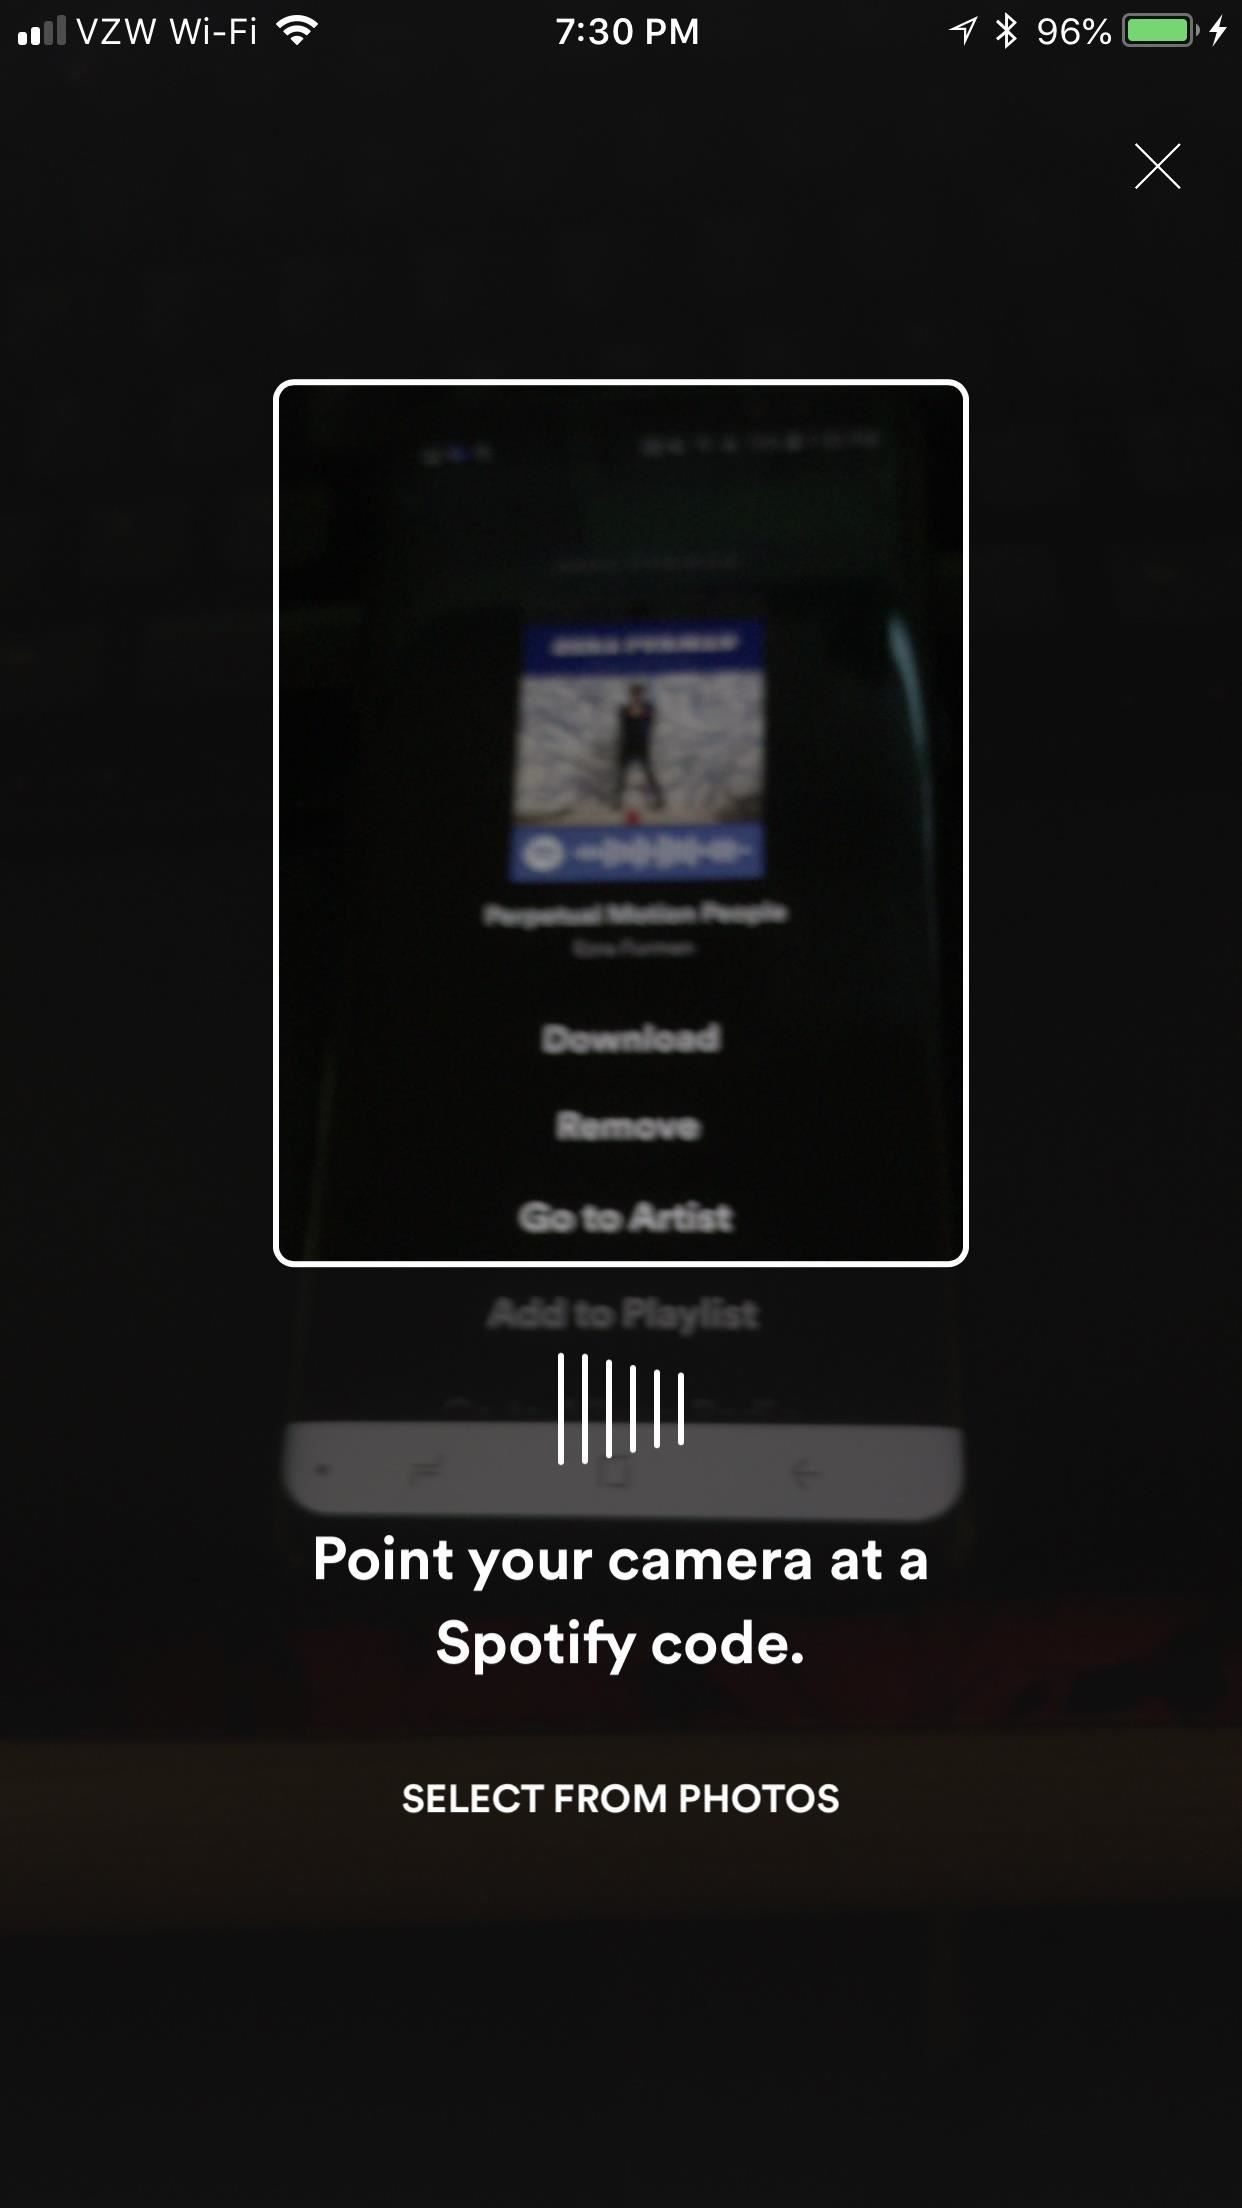 Spotify 101: How to Easily Share Music to Friends from Android & iPhone